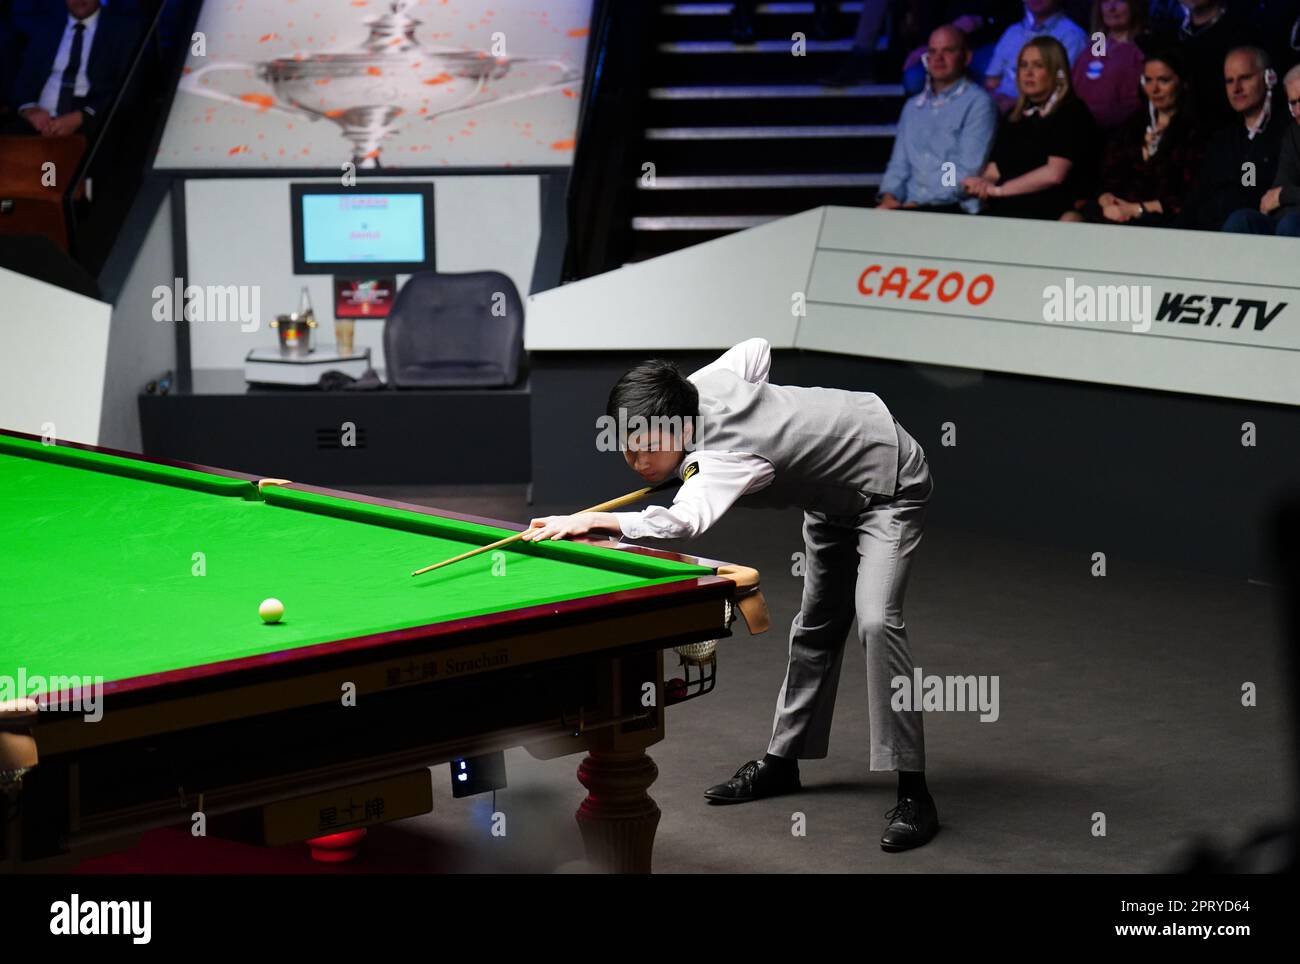 Si Jiahui in action against Luca Brecel (not pictured) on day thirteen of the Cazoo World Snooker Championship at the Crucible Theatre, Sheffield